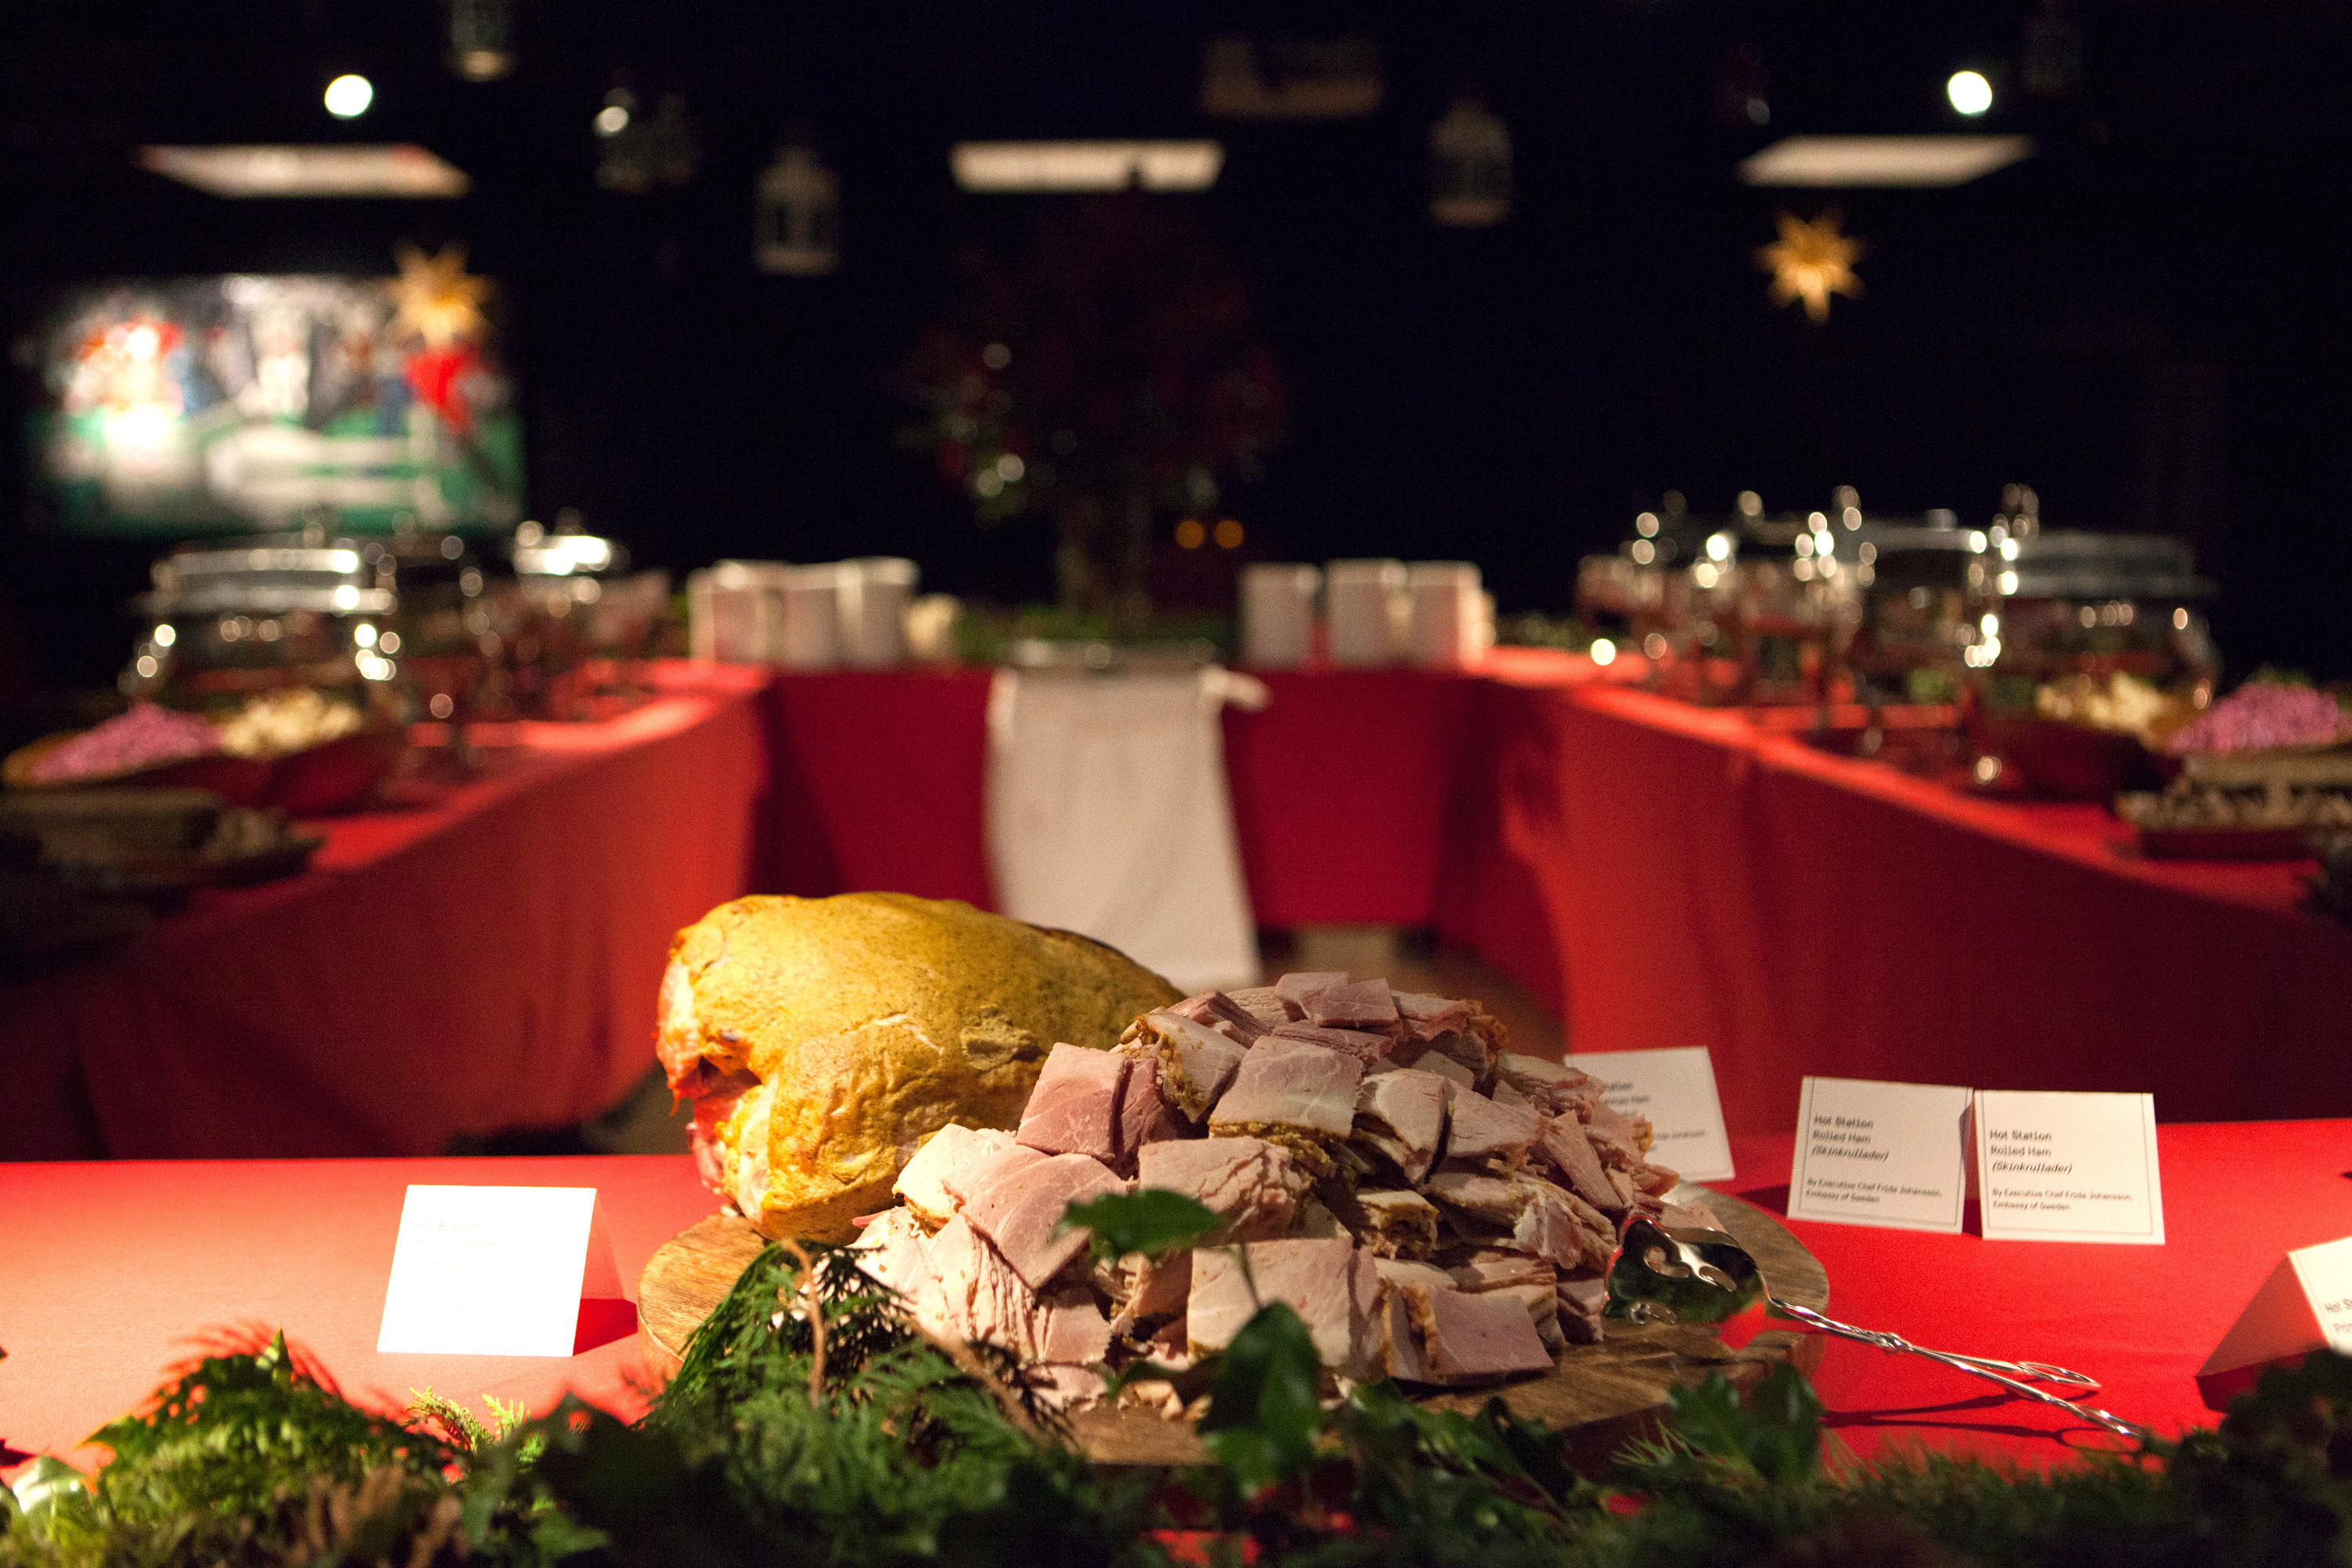 Ham is often considered a star of the julbord, seen here at the Swedish embassy. Aquavit chef Emma Bengtsson says as a child, she loved her mother's Christmas ham: It was "really, really good. Other people would say it's dry as hell and overcooked, but that's what I grew up with. I can't eat it any other way."